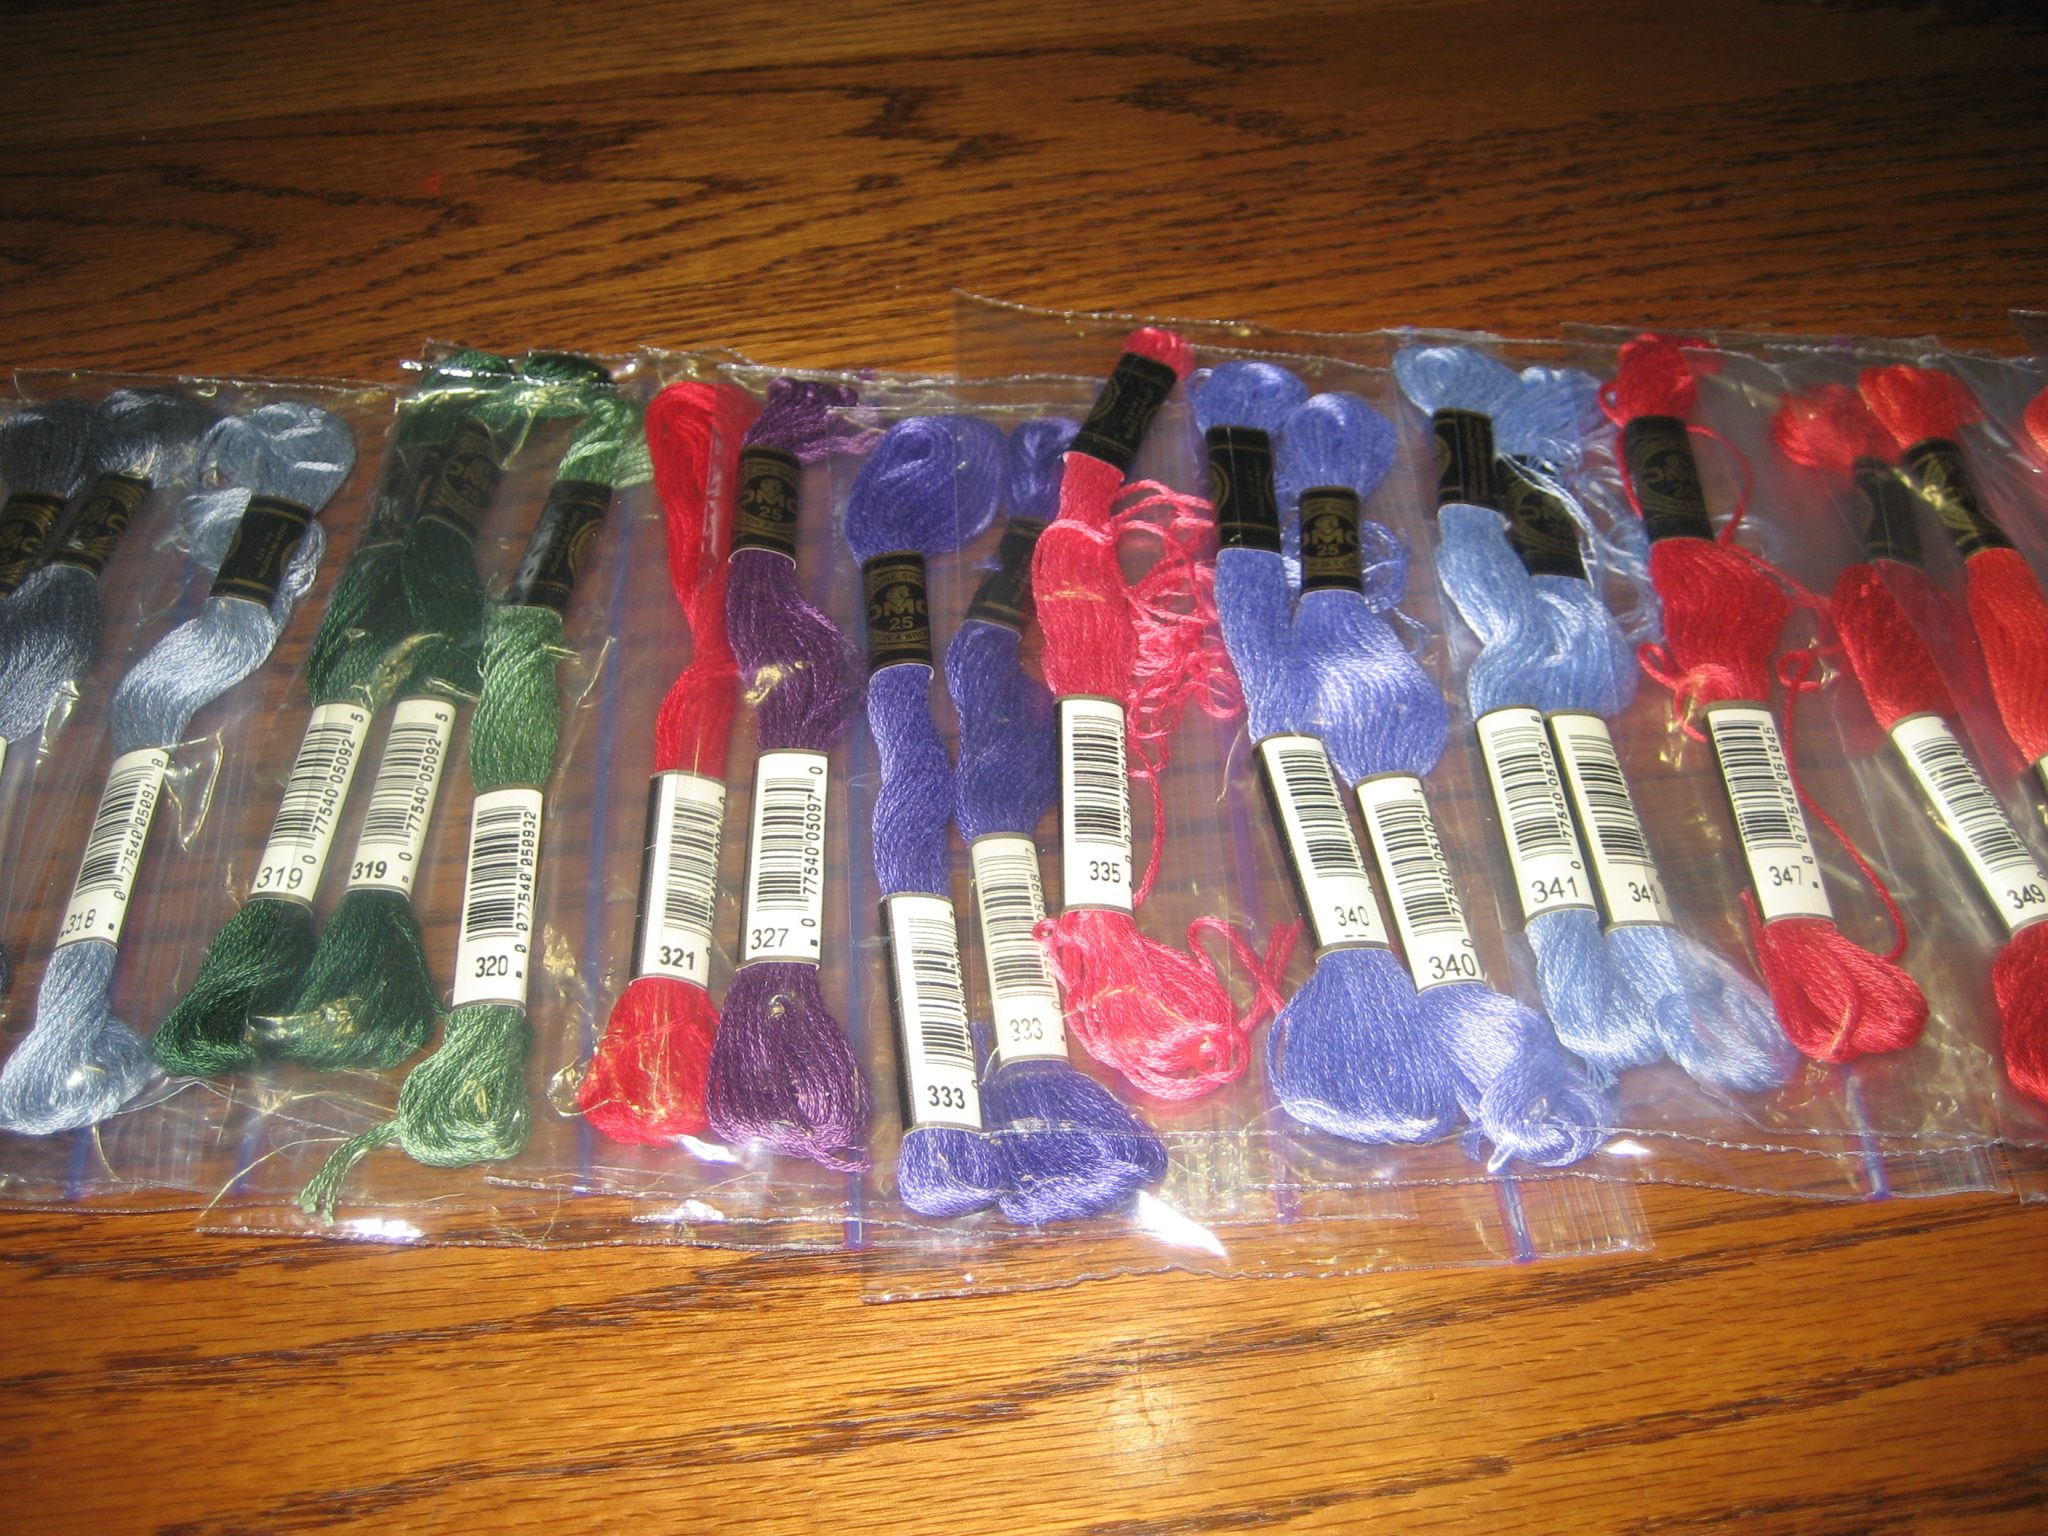 A Jones For Organizing  Embroidery floss storage and organization